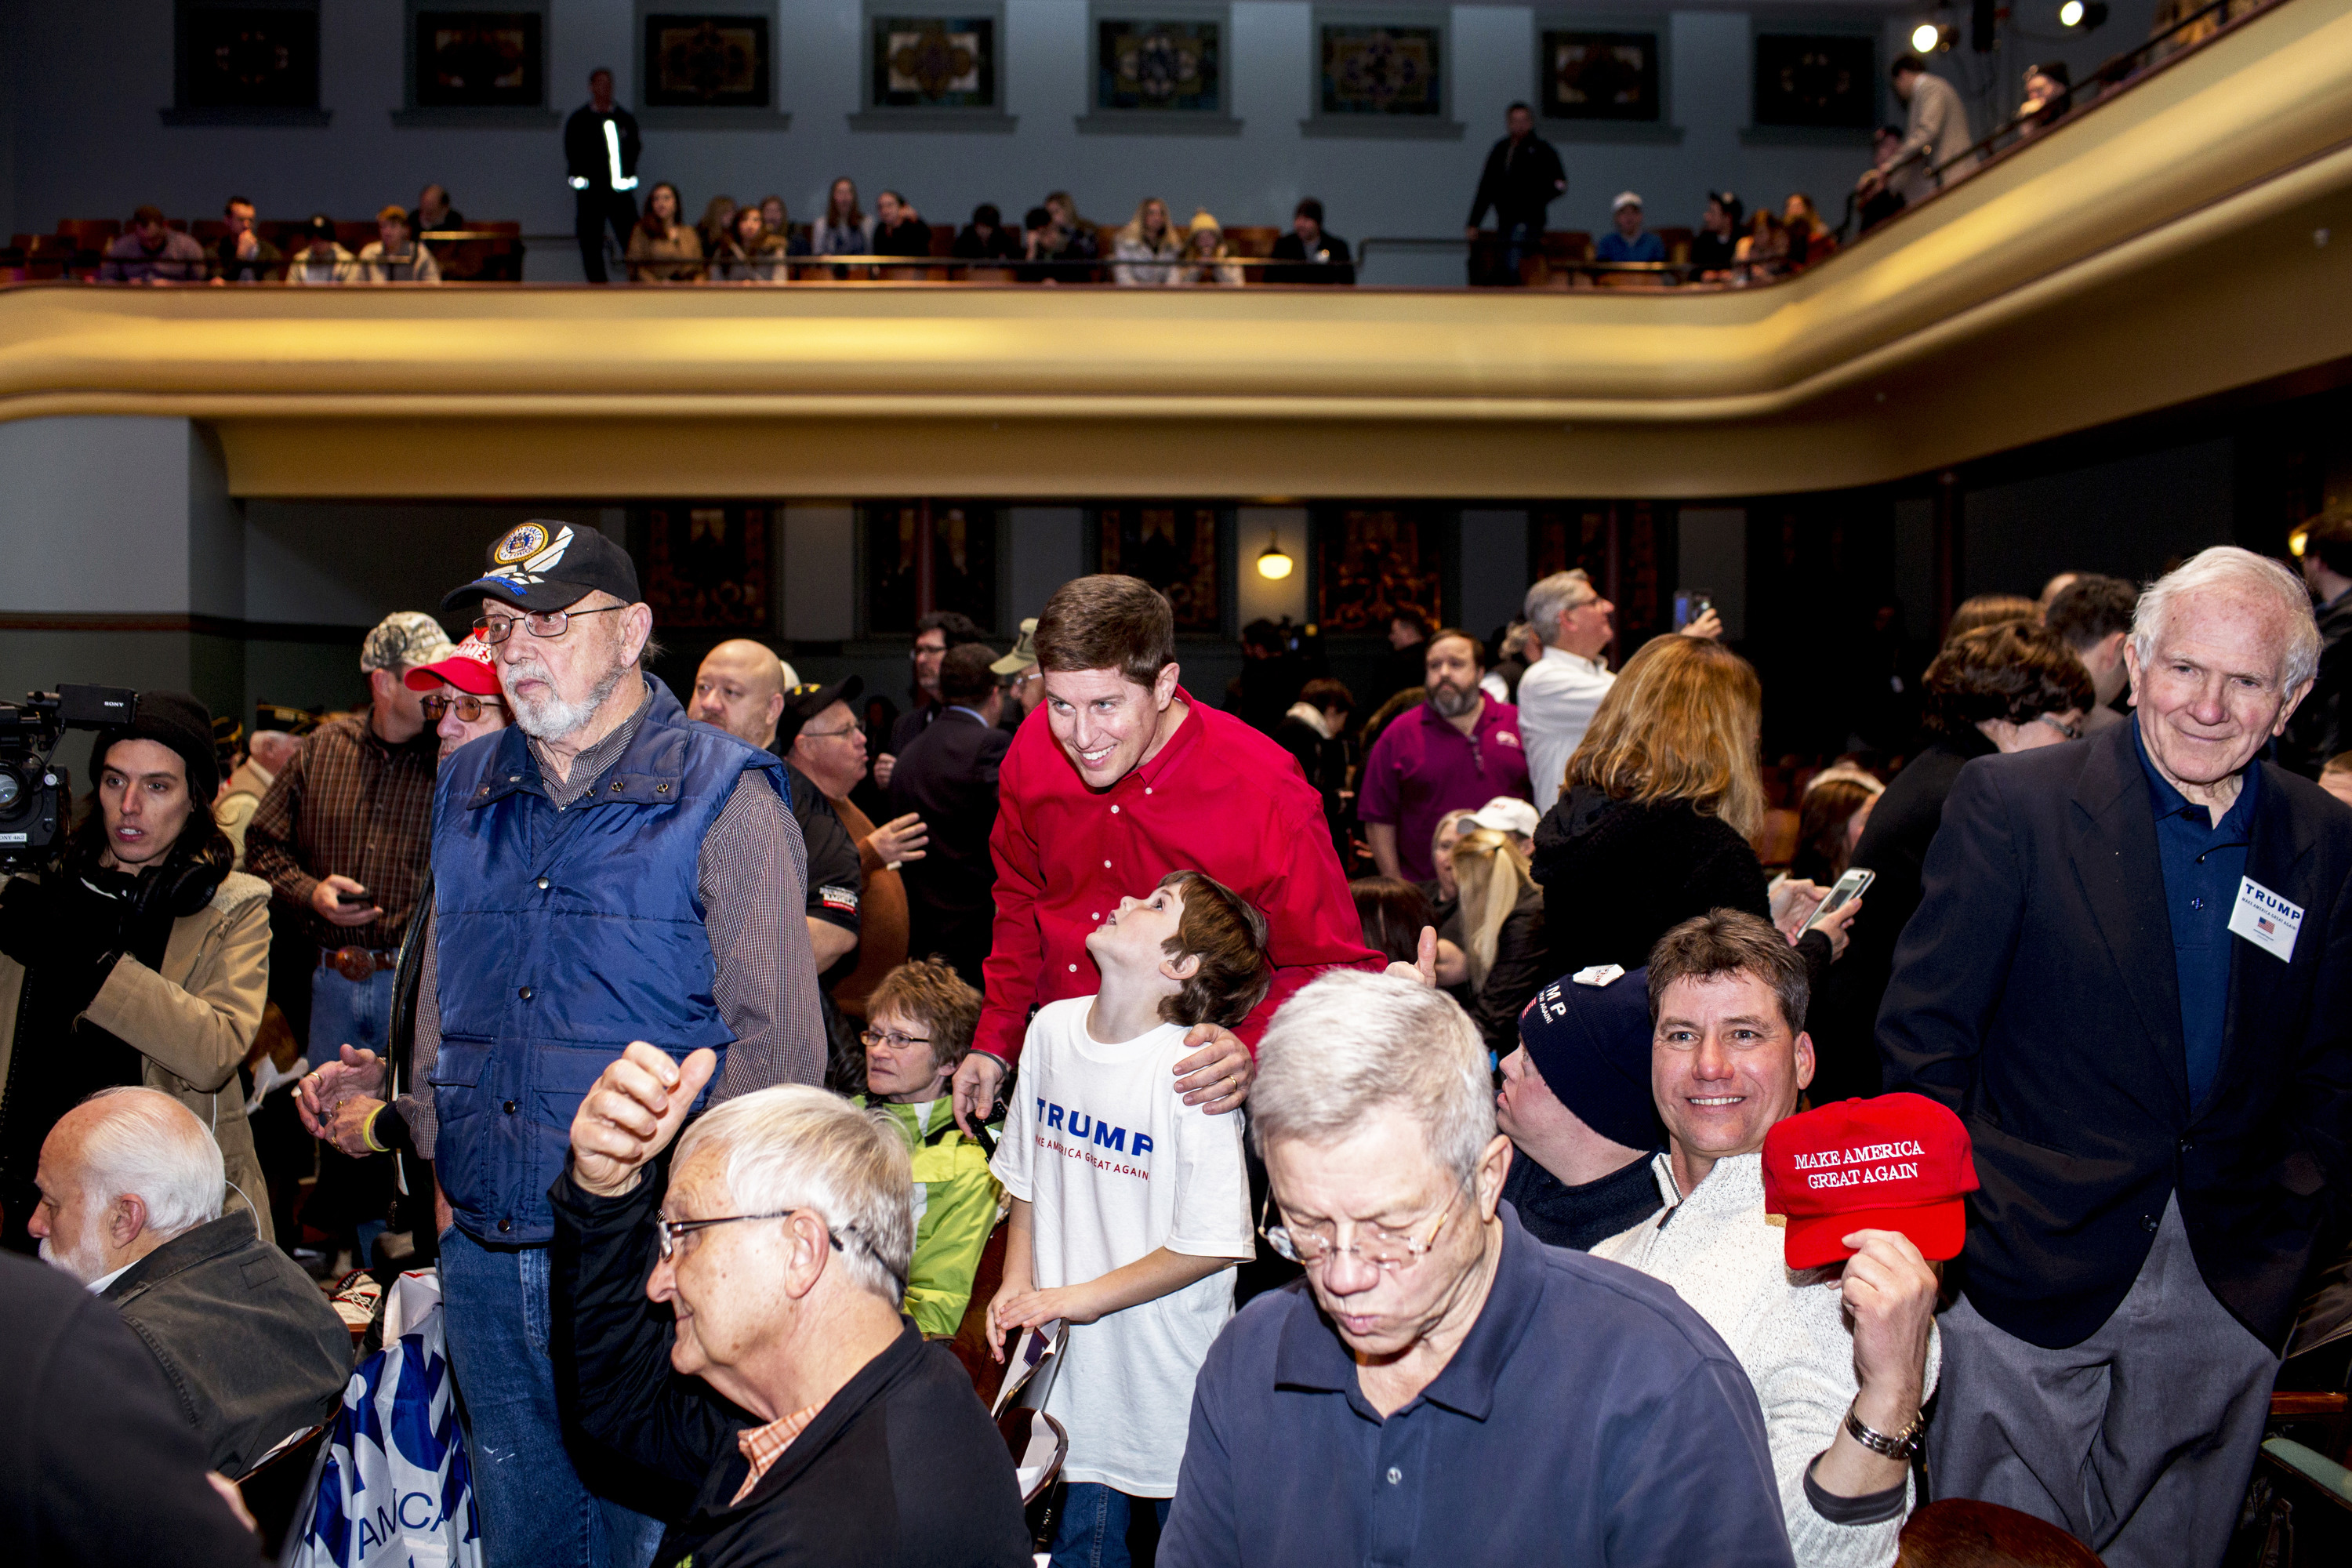 Attendees at a Donald Trump rally in Des Moines, Iowa on Jan. 28, 2016. (Natalie Keyssar for TIME)